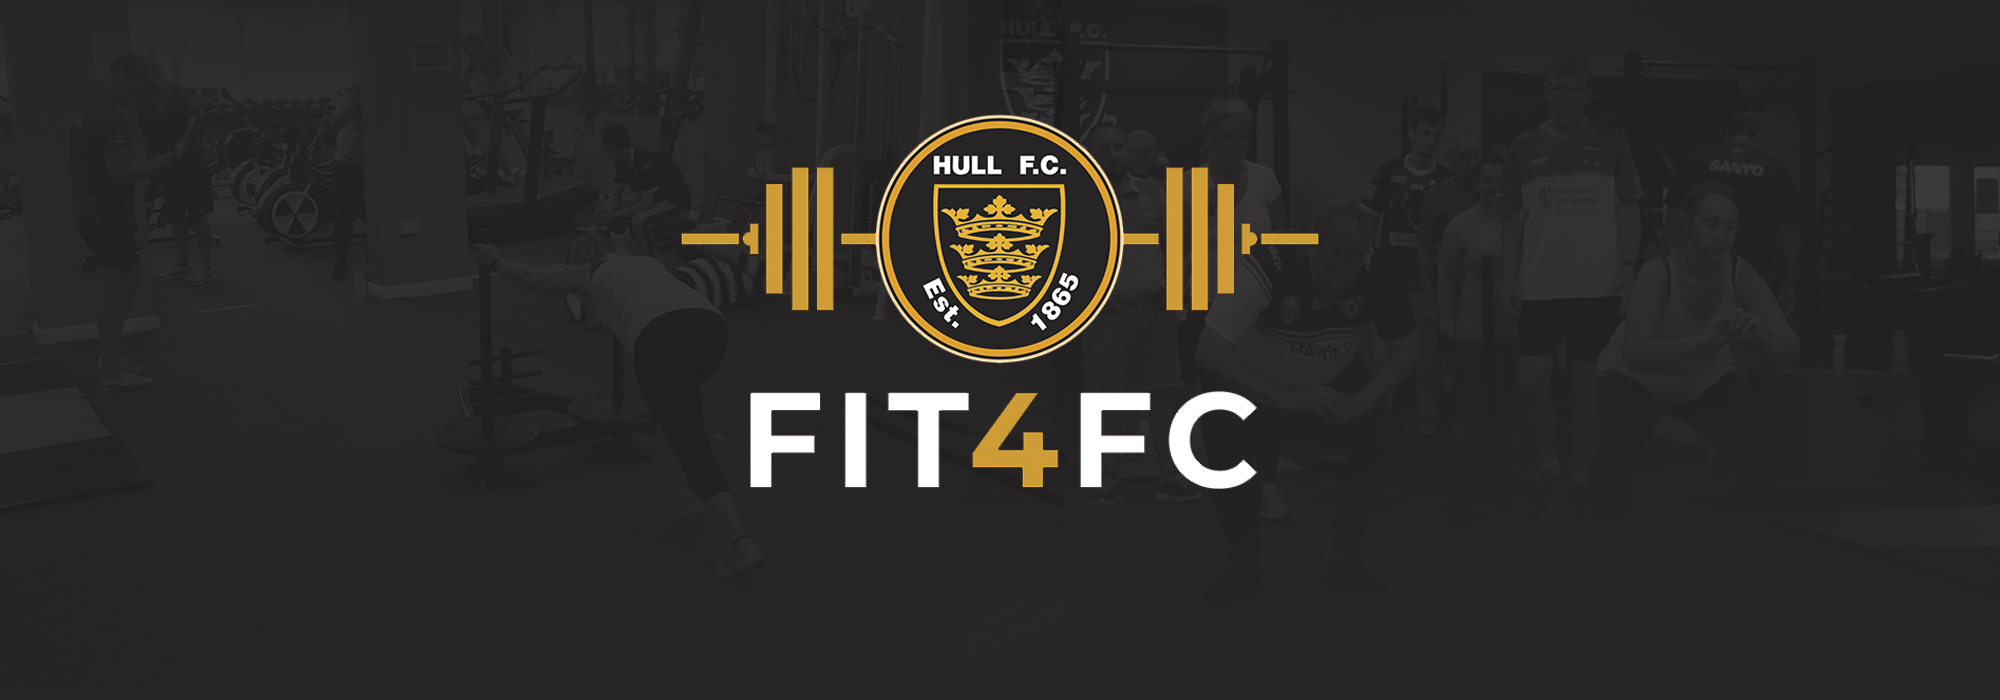 Join First Online ‘FIT4FC’ Session Tomorrow